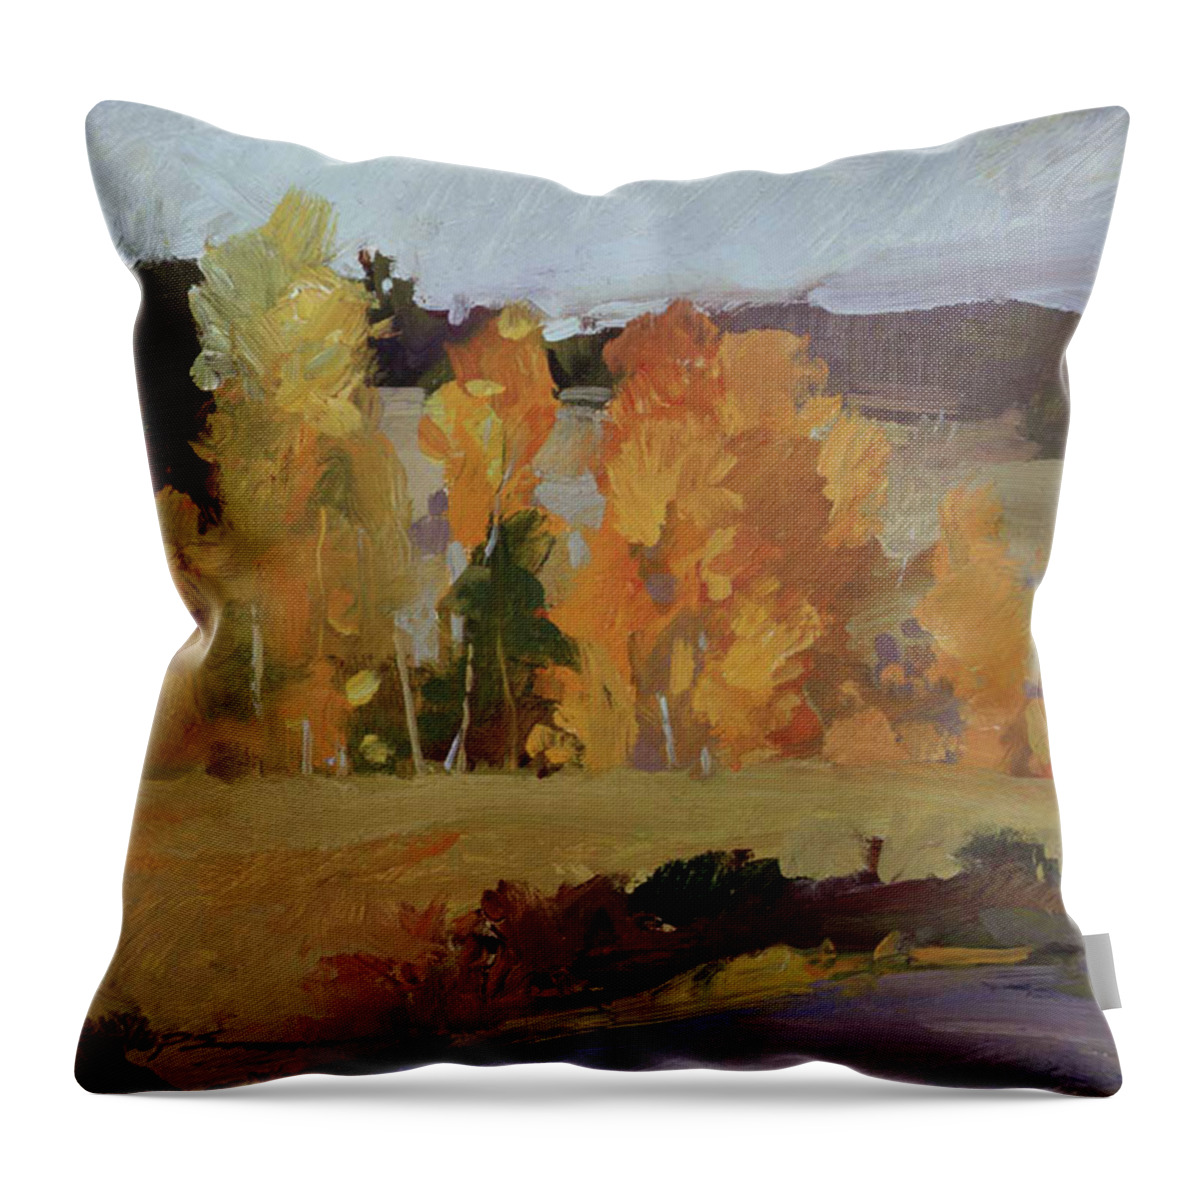 Montana Landscape Throw Pillow featuring the painting Montana Autumn by Betty Jean Billups